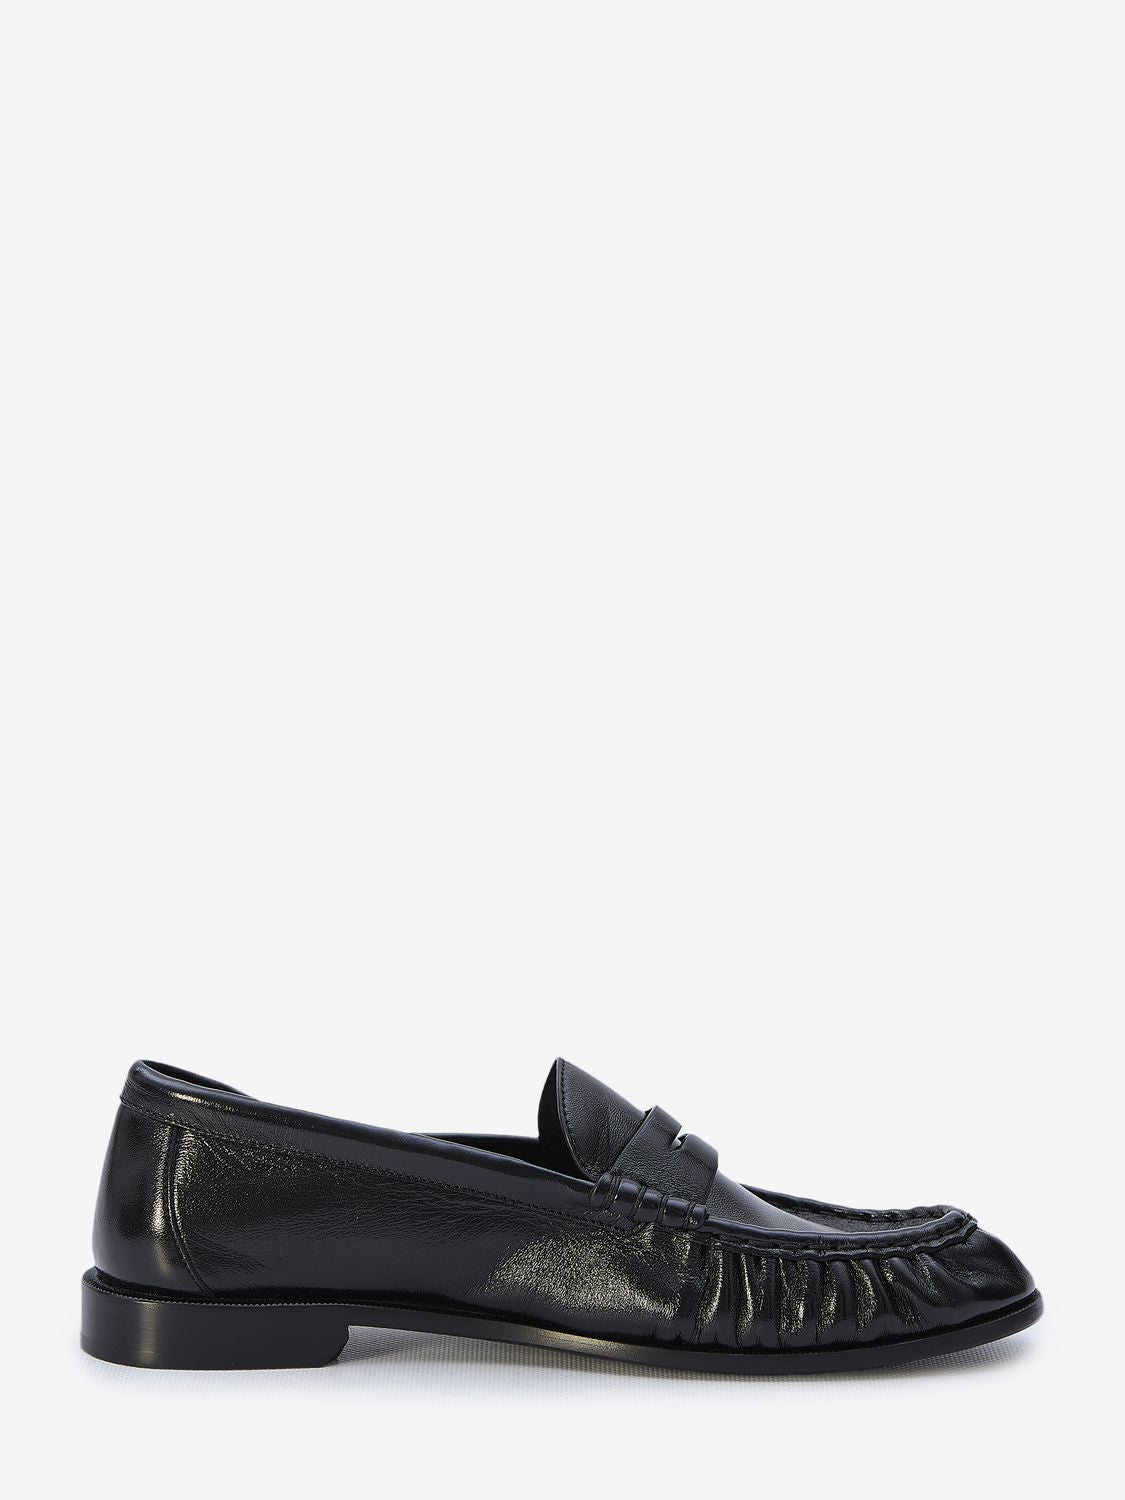 SAINT LAURENT Black Leather Loafers for Women: Chic and Comfortable